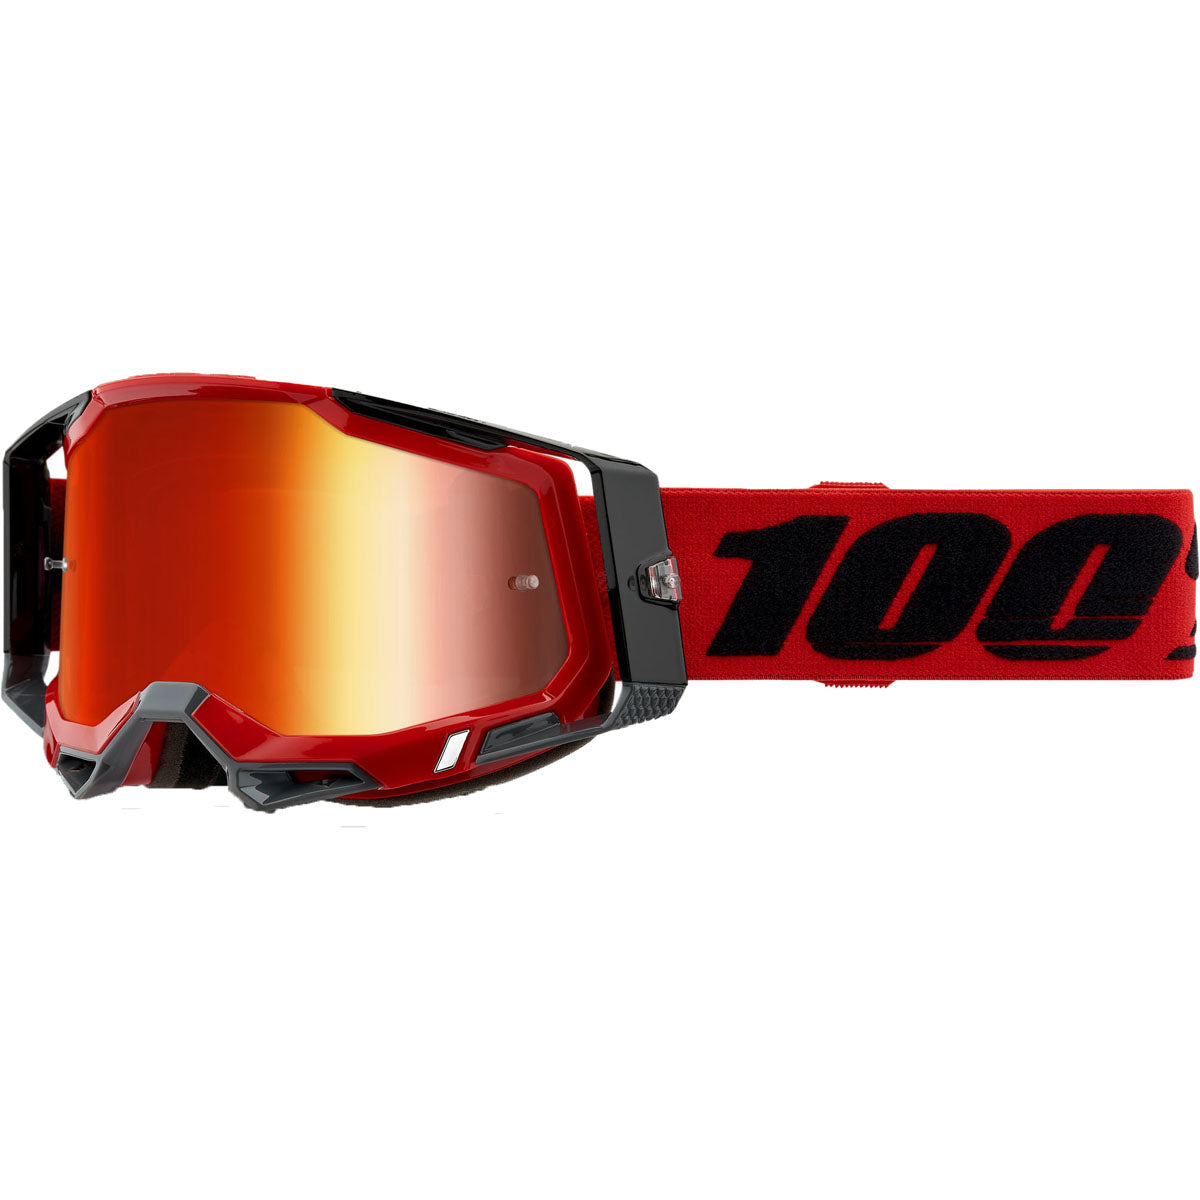 100% Racecraft 2 Goggles Red / Mirror Red Lens